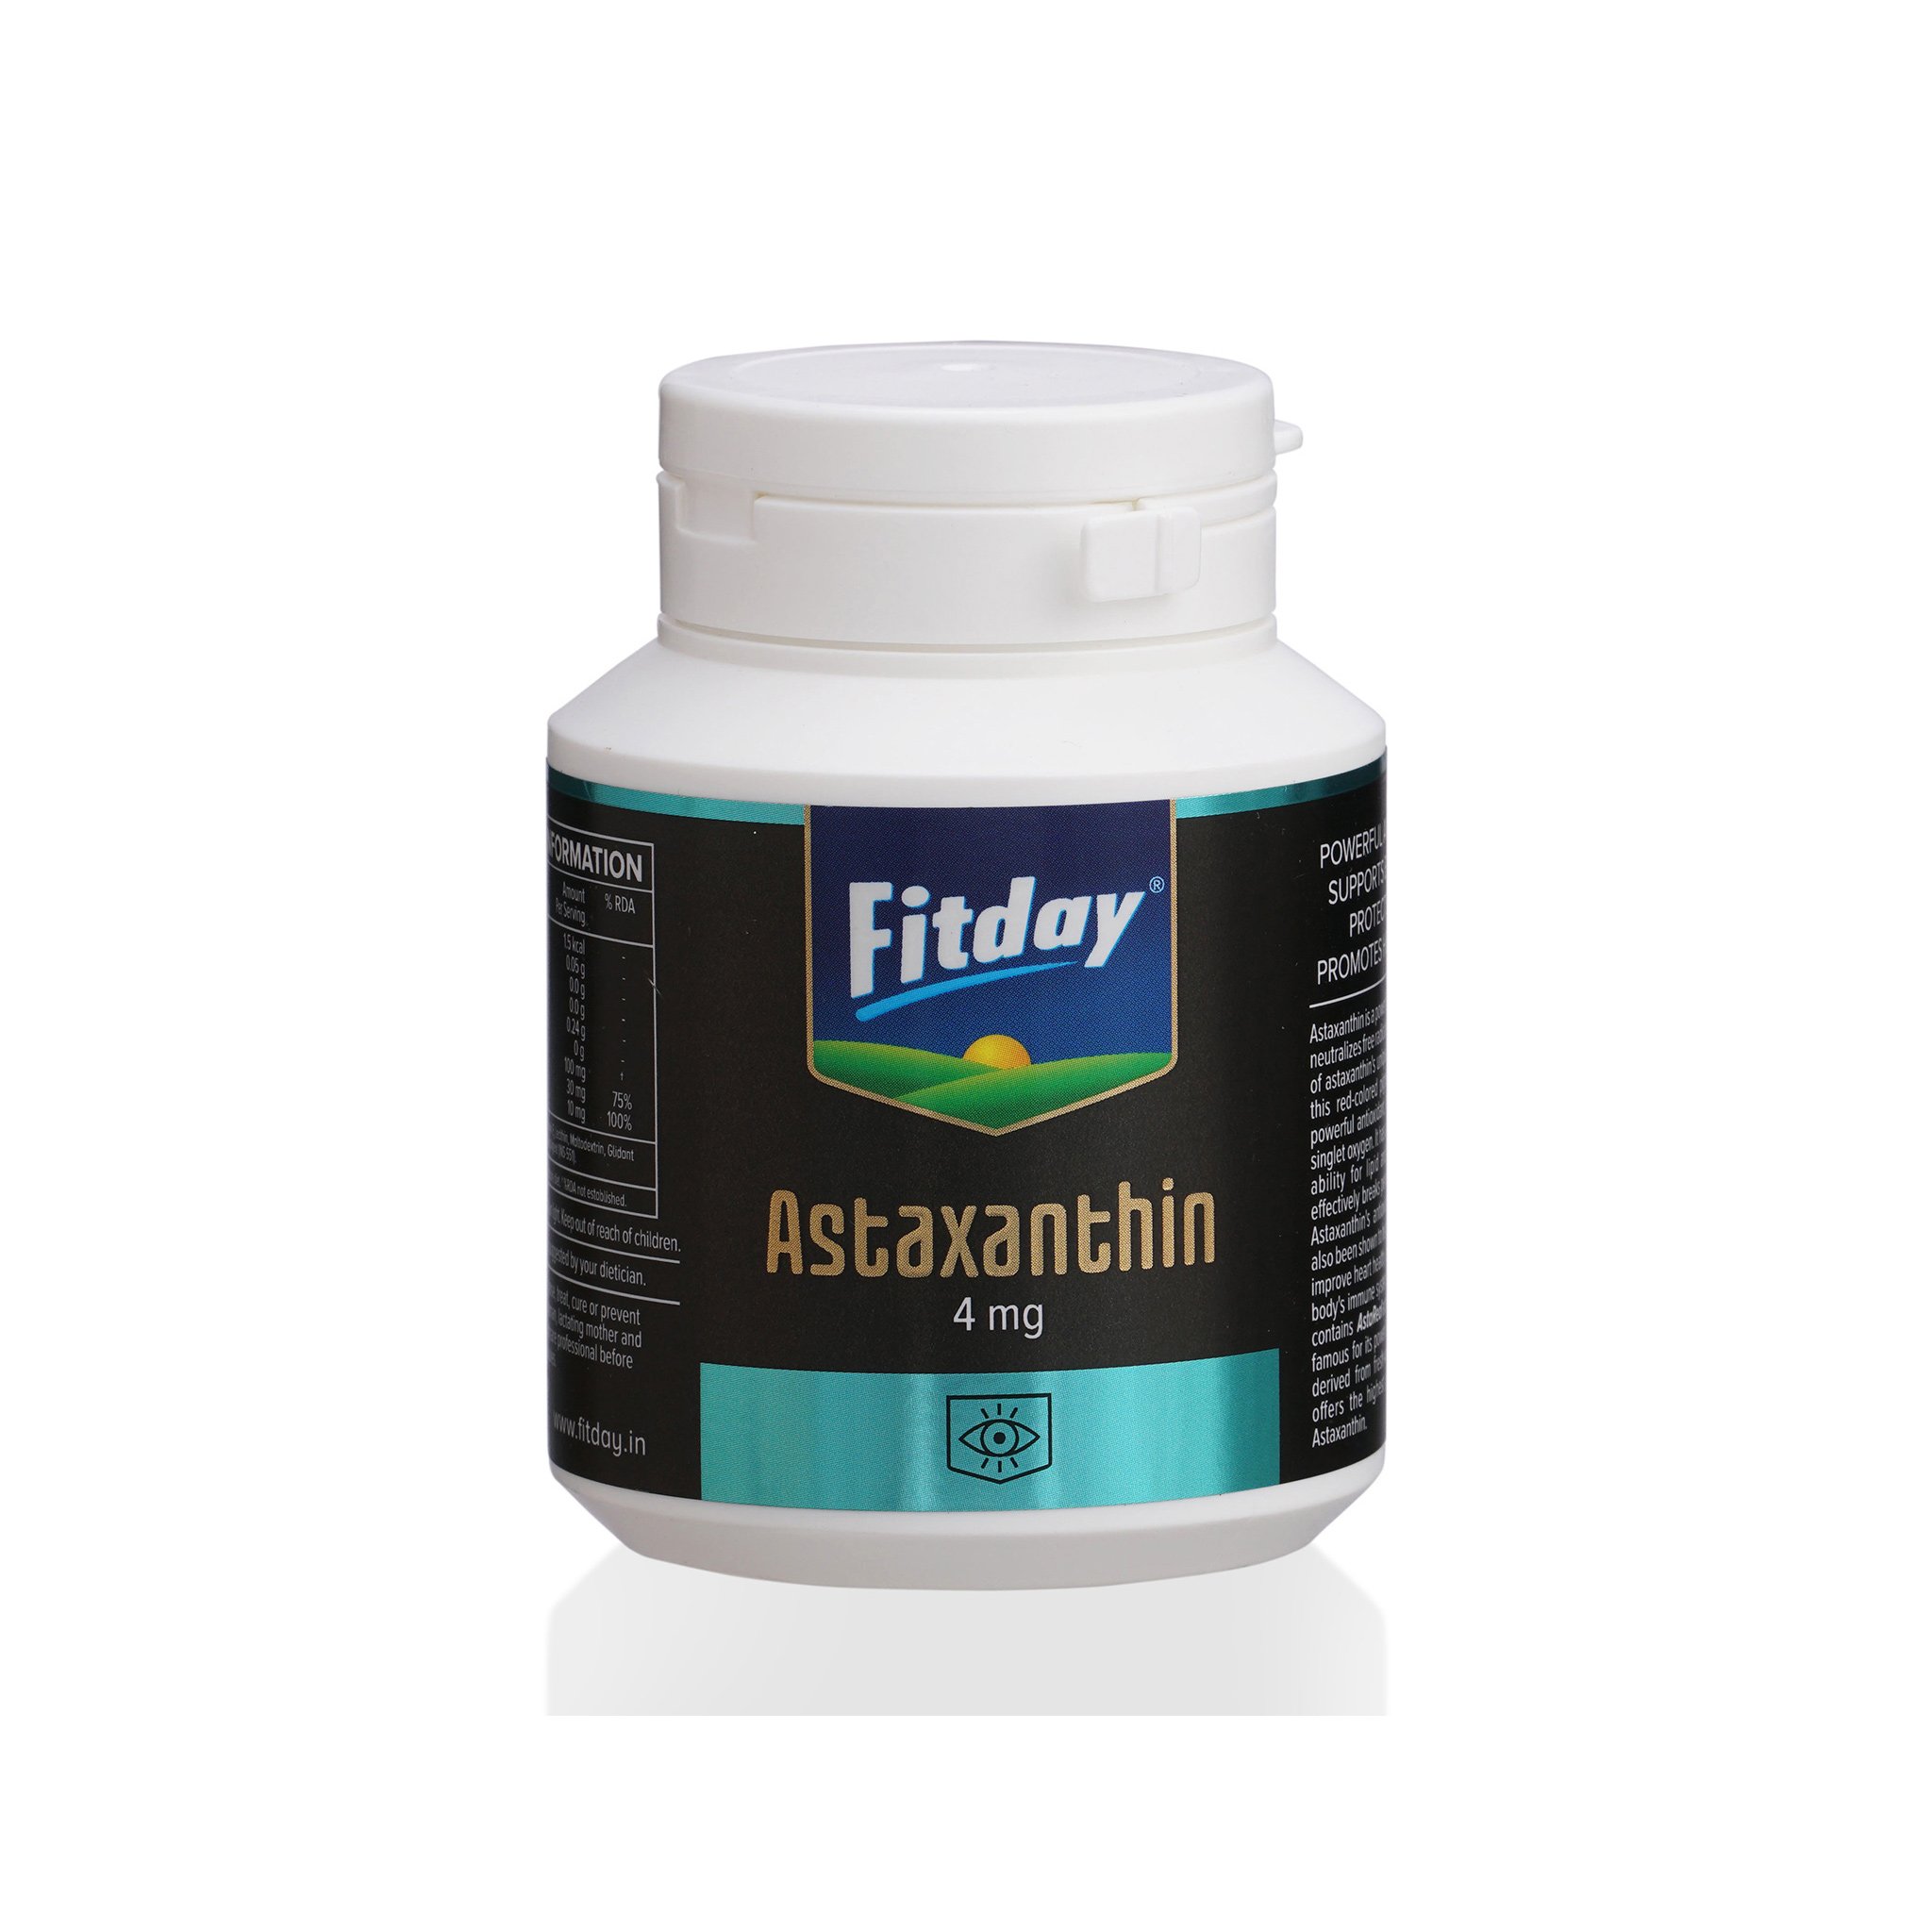 FITDAY Astaxanthin - 4 mg (60 Capsules) Buy 1 Get 1 Free